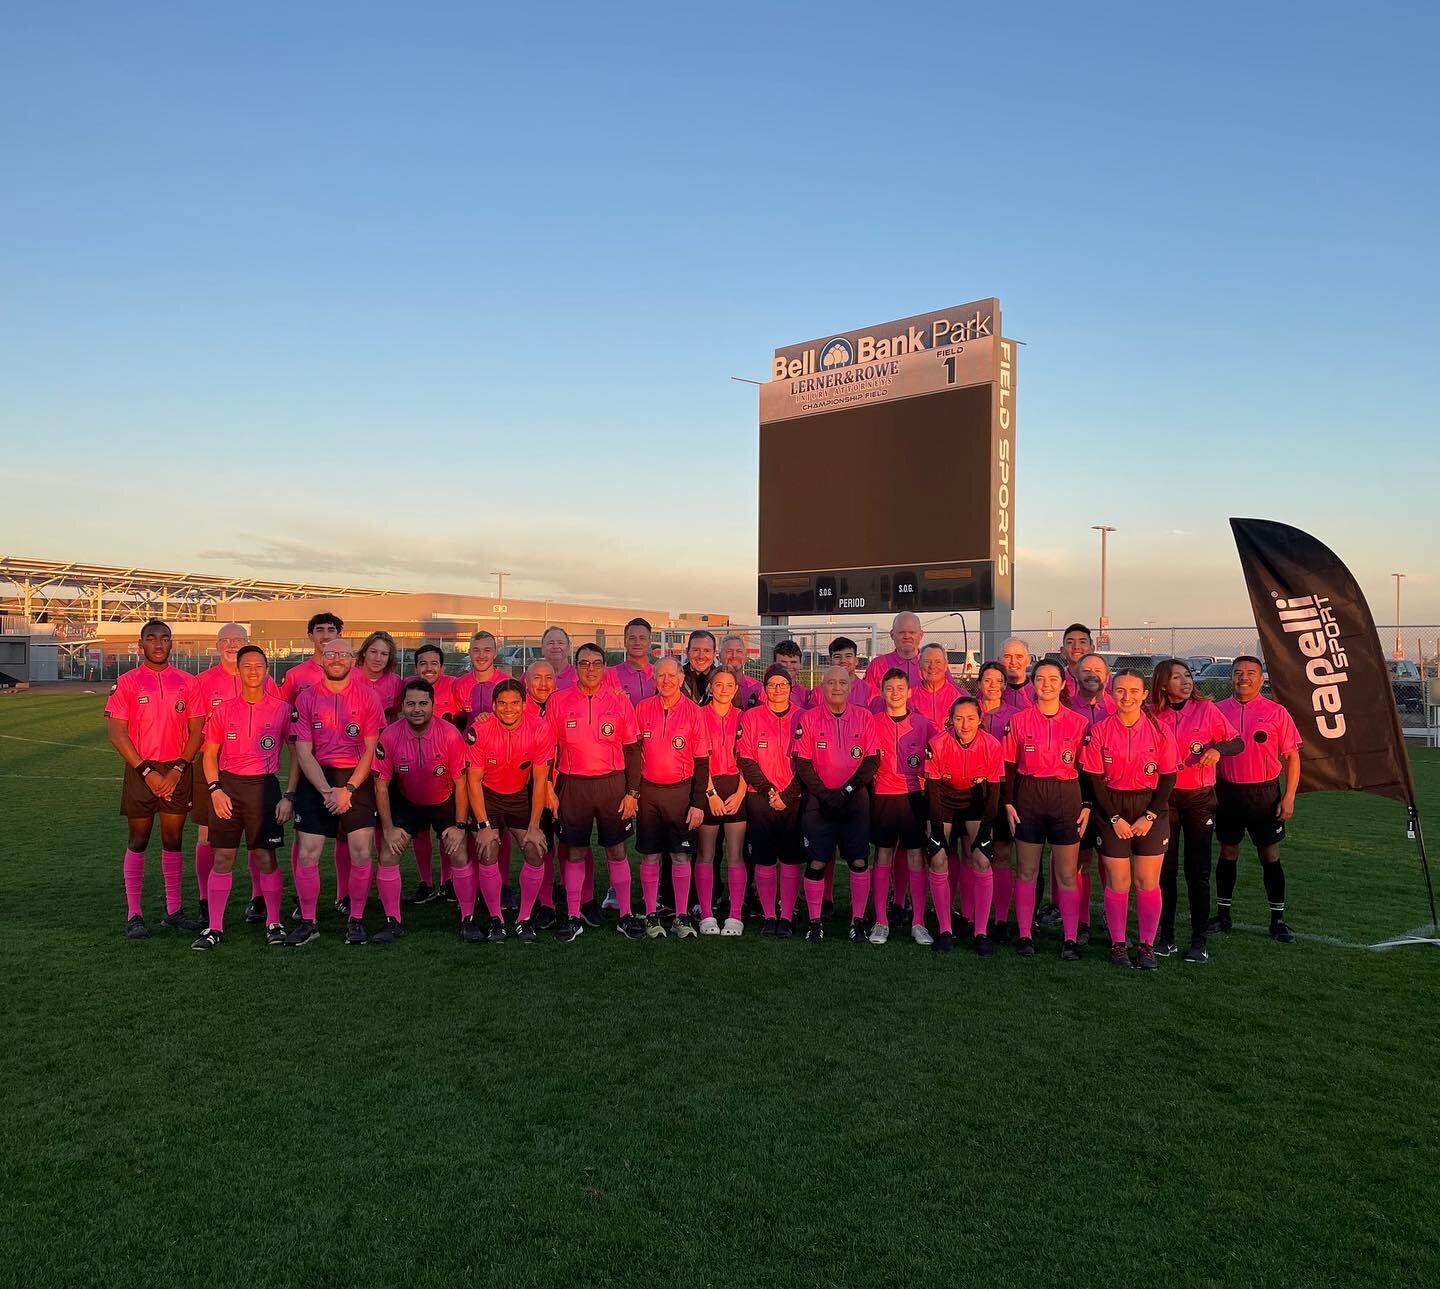 Today concluded the Far West ODP Championships with the final matches at Bell Bank Park.  Referees awarded a final match were outfitted in pink kits through the Arizona State Referee Adminstration partnership with Capelli Sport.